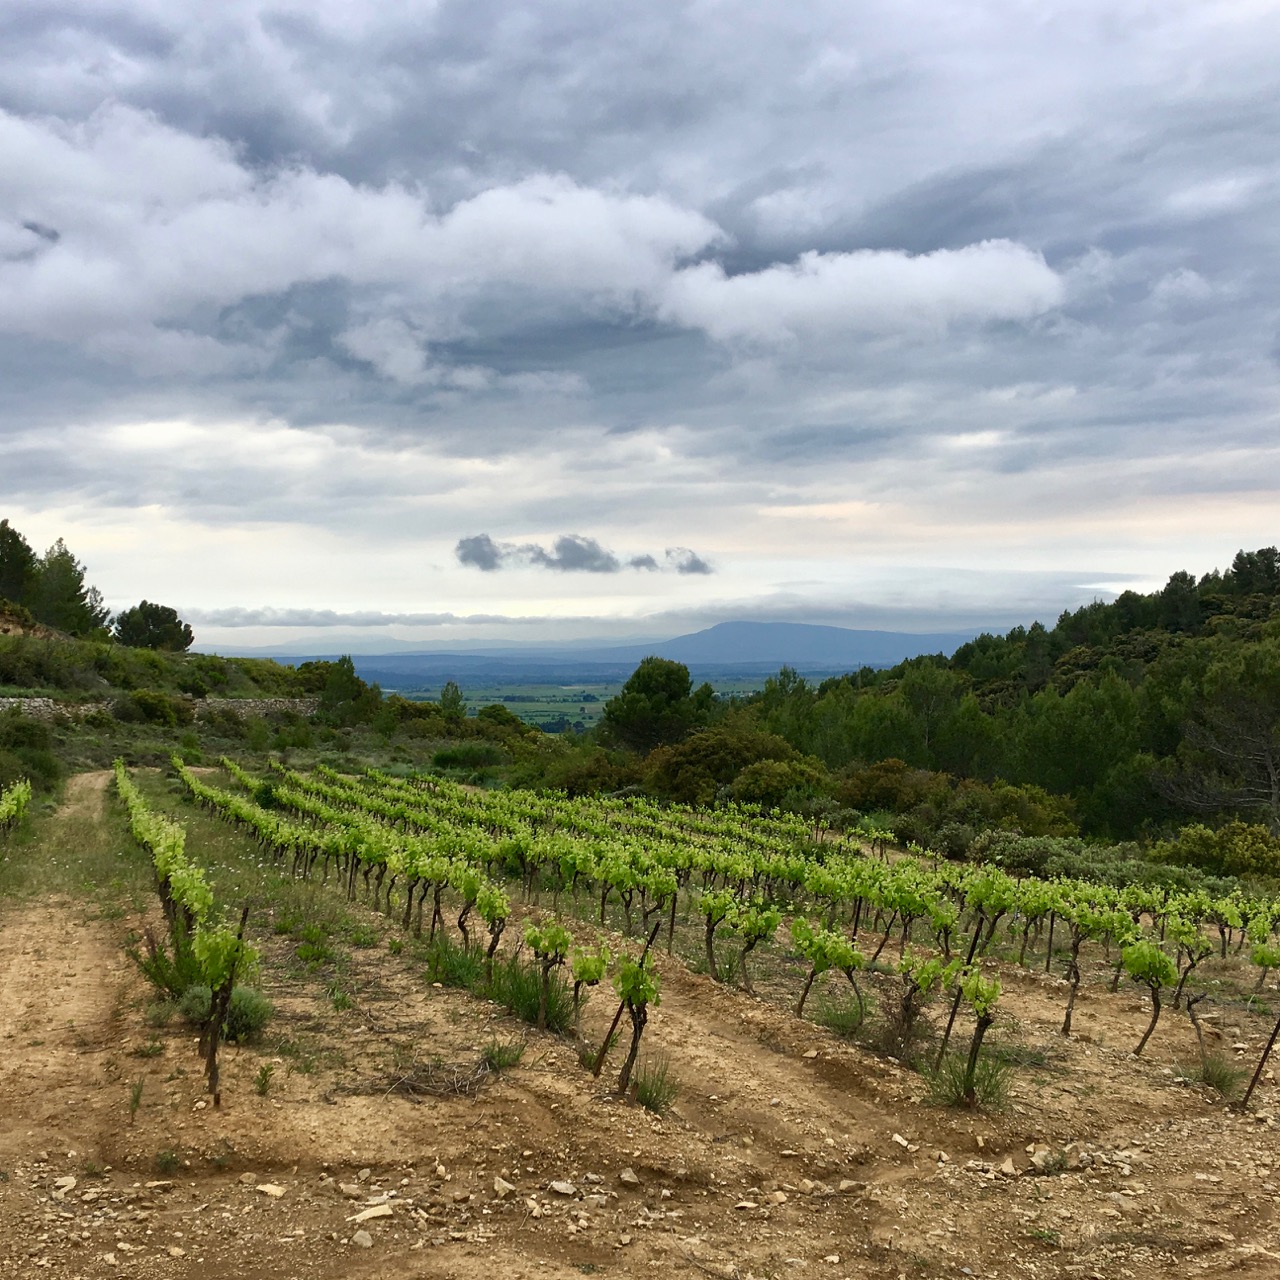 The Domaine Les Combes Cachées is extending